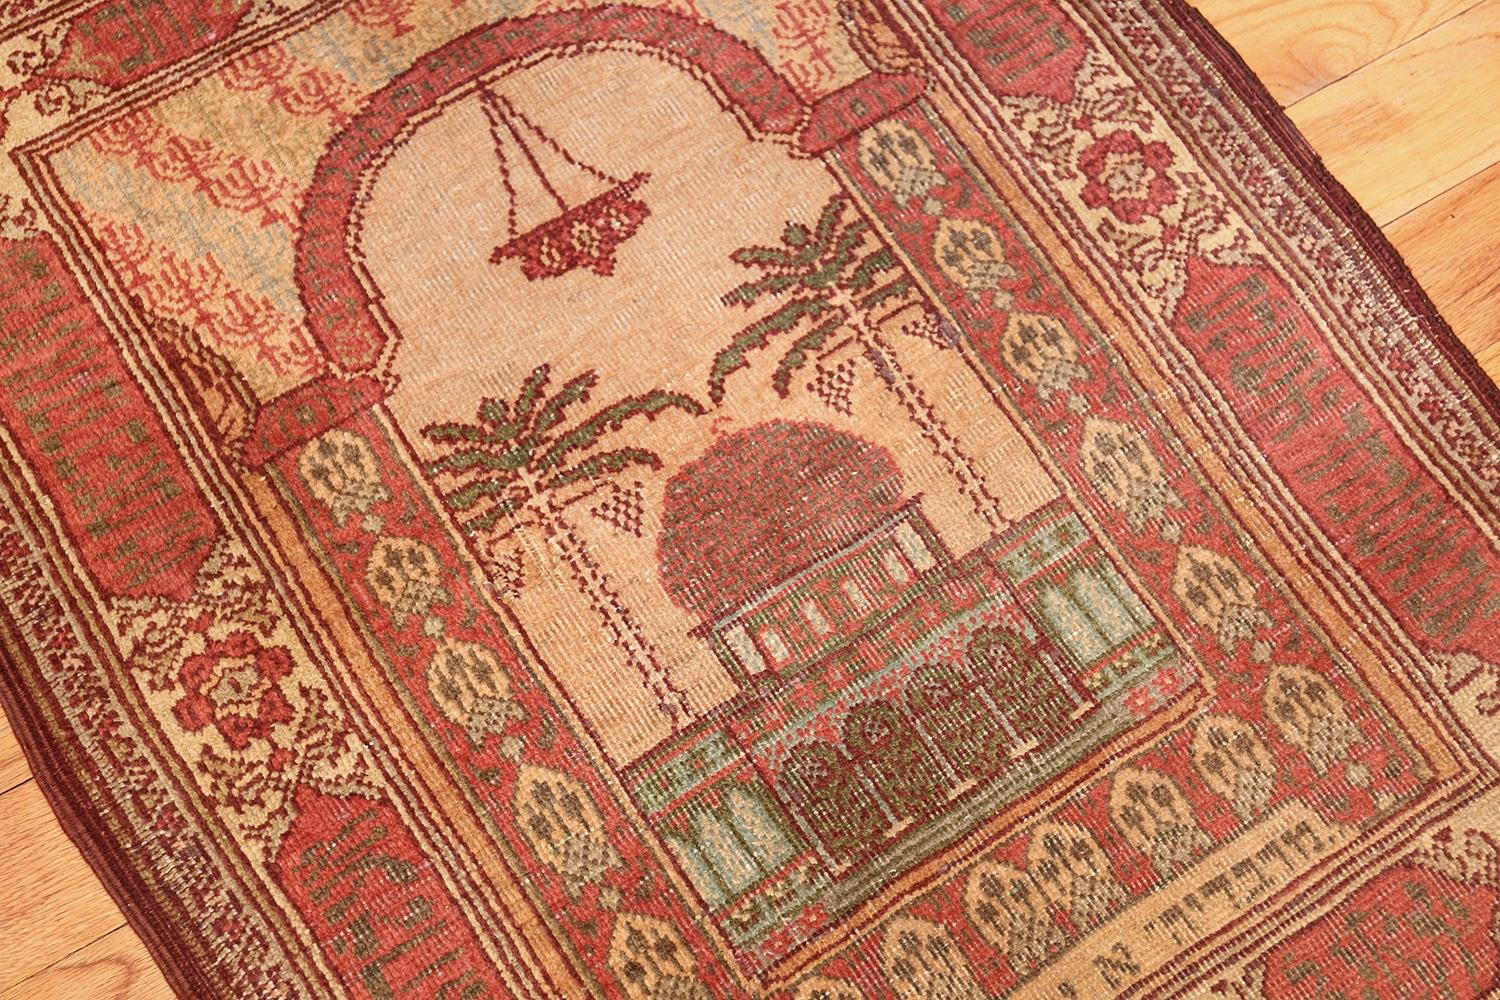 Beautiful and artistic antique pictorial dome of the Rock design Israeli Marbediah rug, country of origin / rug type: Israeli rug, date circa 1920. Size: 2 ft 4 in x 3 ft (0.71 m x 0.91 m). 

